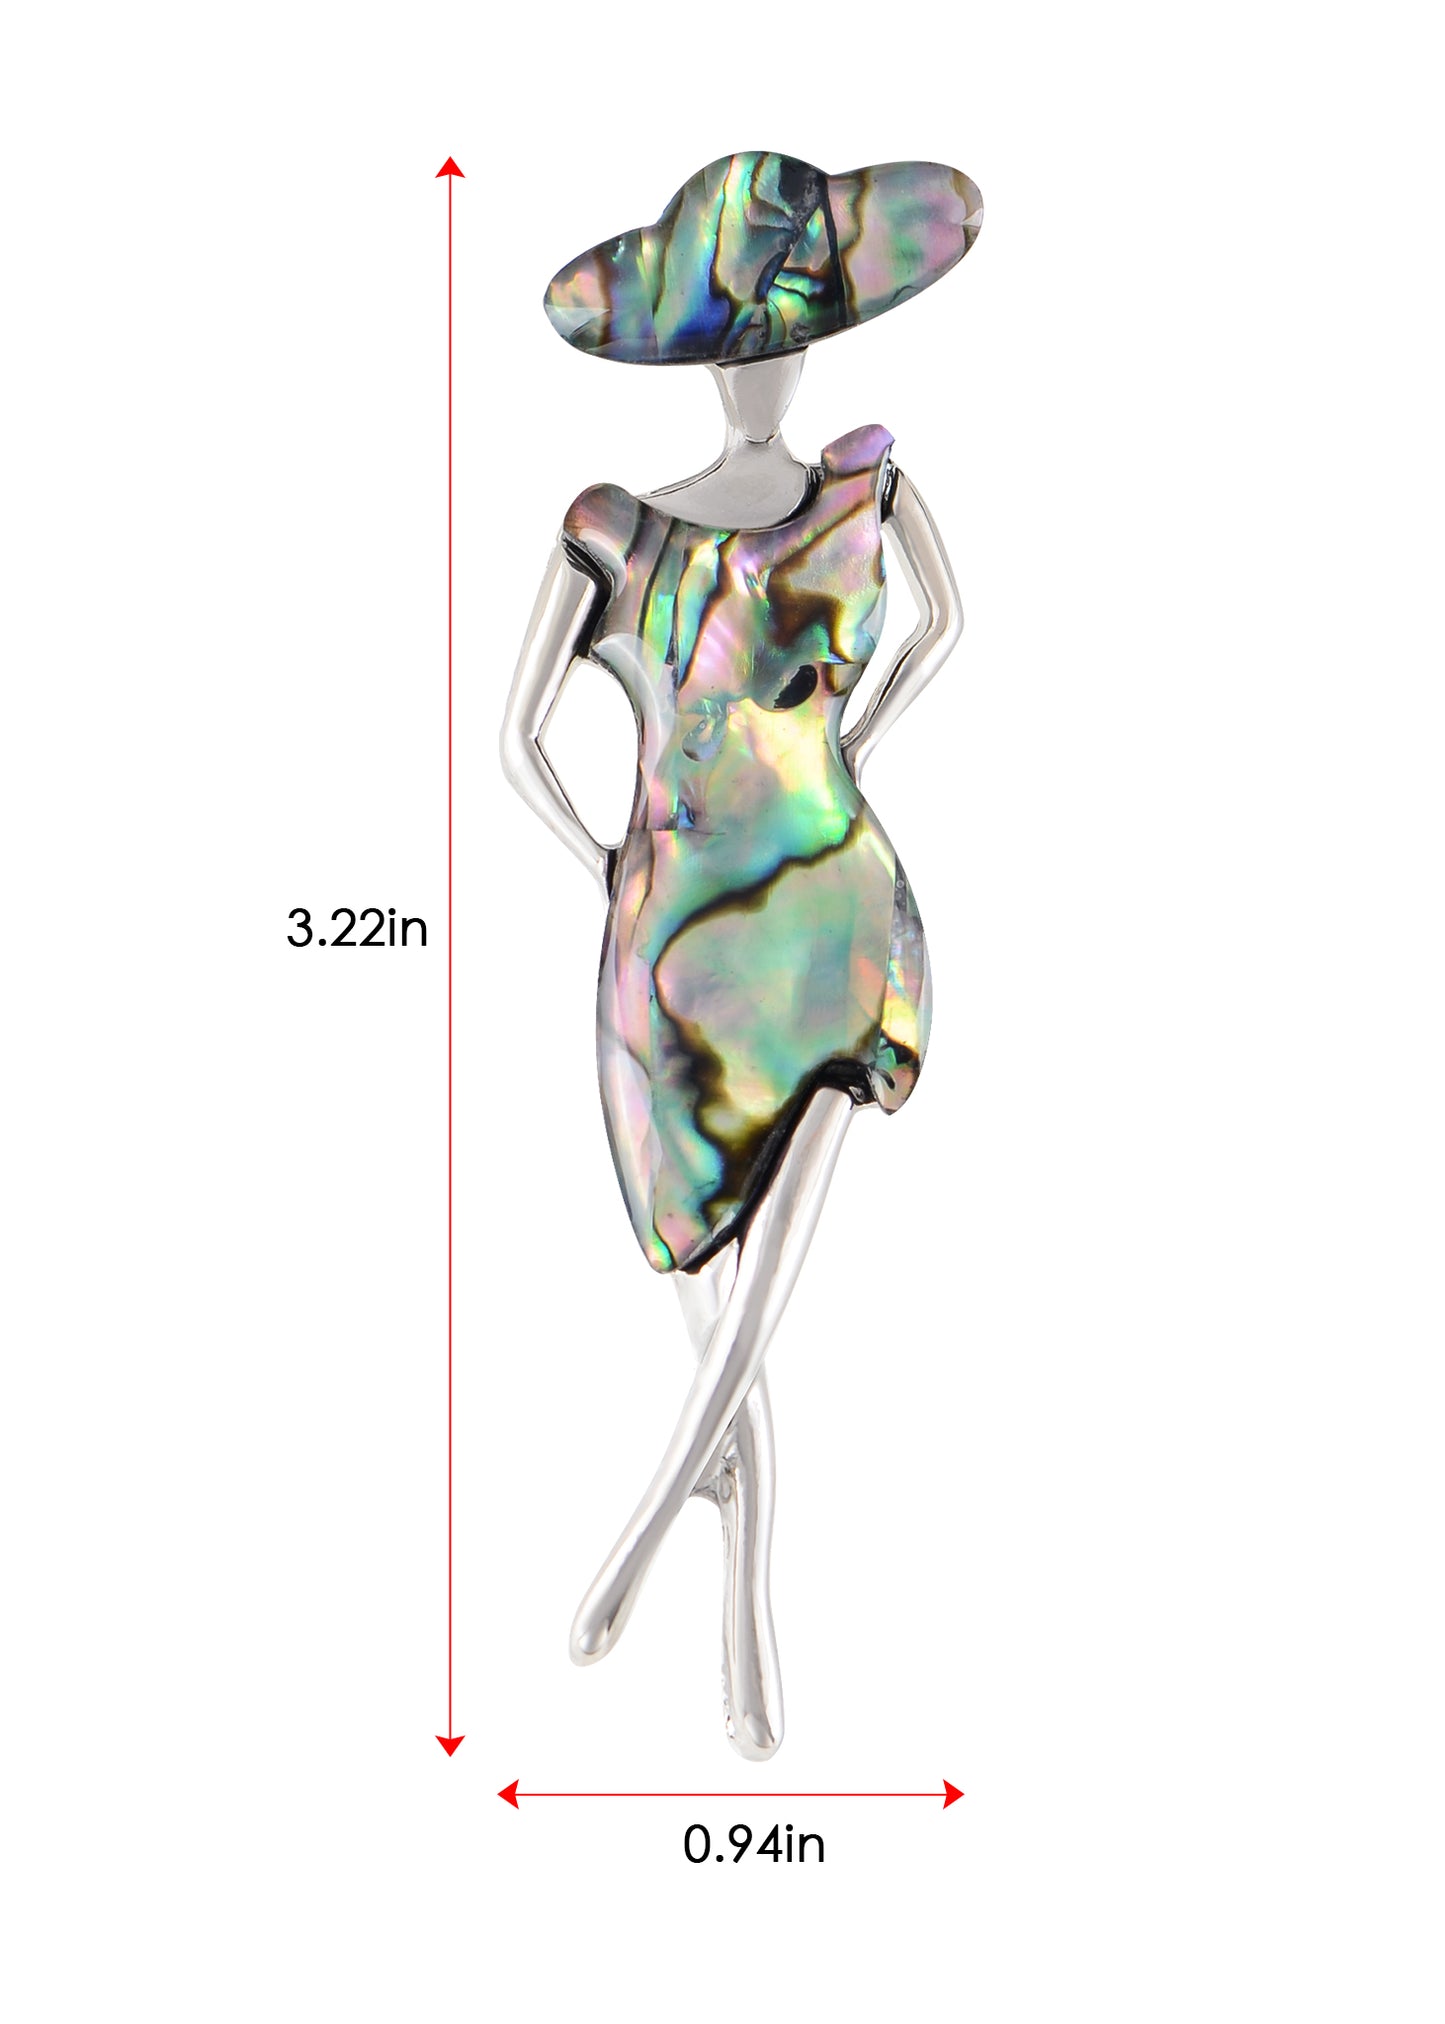 Alilang Silver Tone Abalone Shell Elegant Lady Women Dancer Brooch Pin for Wedding Birthday Party